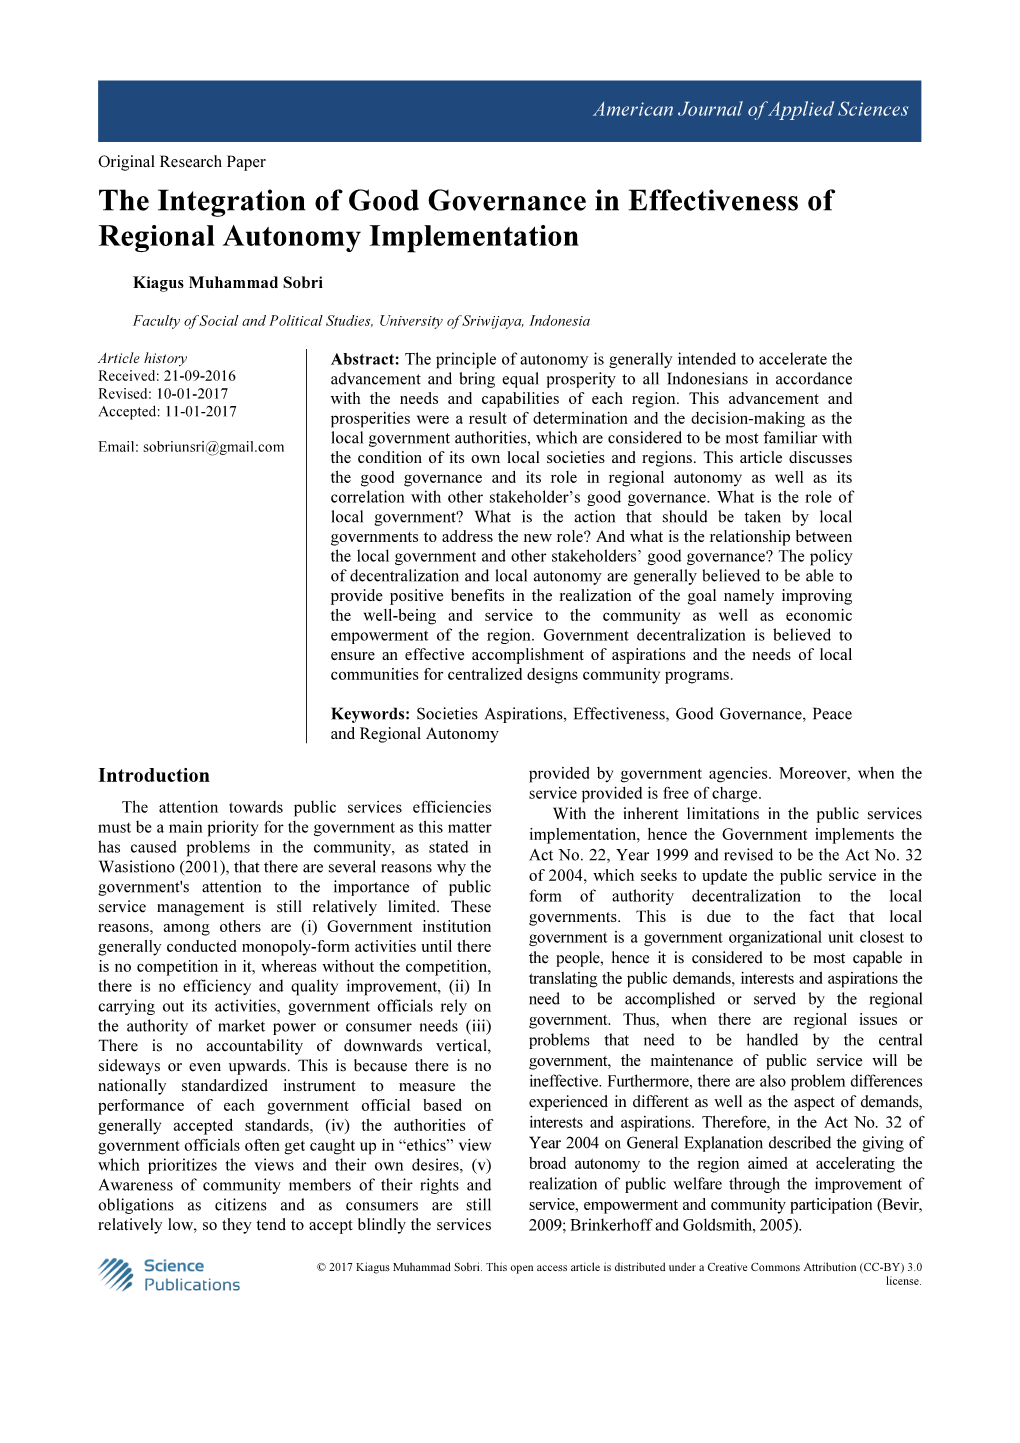 The Integration of Good Governance in Effectiveness of Regional Autonomy Implementation